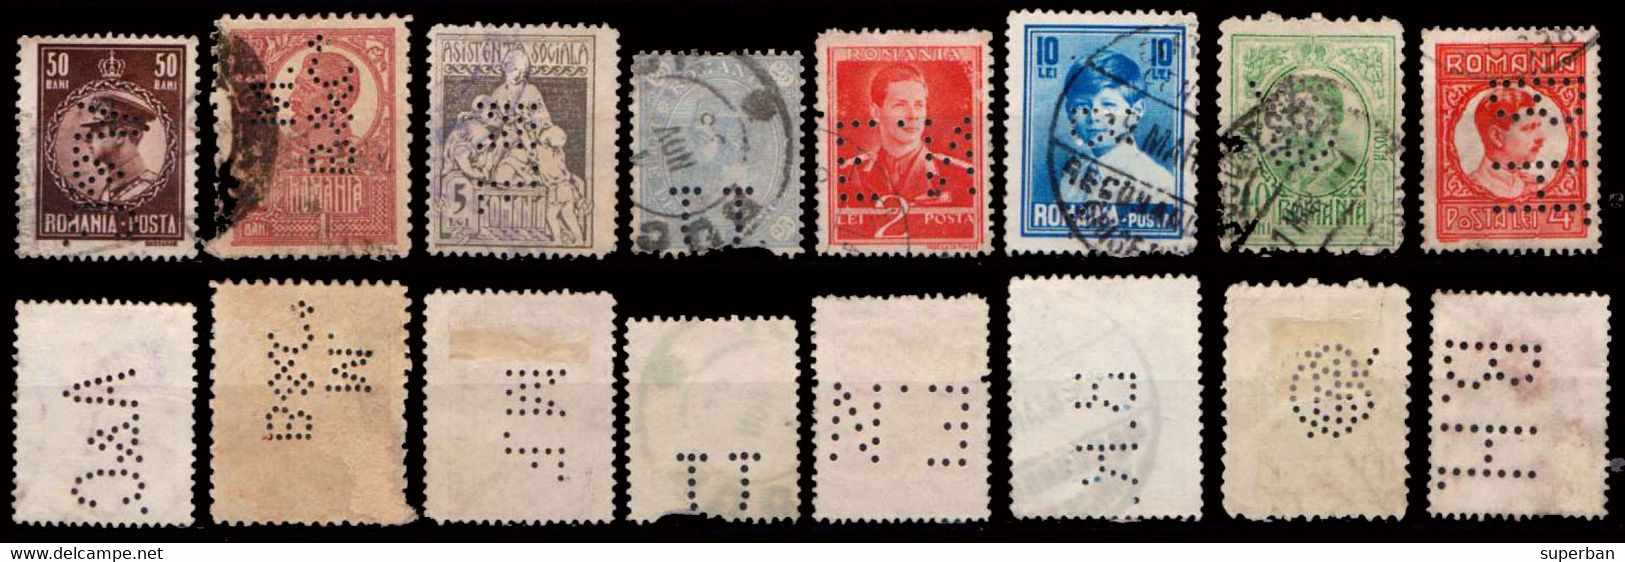 ROMANIA - 46 TIMBRE cu PERFIN - LOT de 46 TIMBRES PERFORÉS / BATCH of 46 STAMPS with PERFORATIONS ~ 1900 - '940 (ai880)